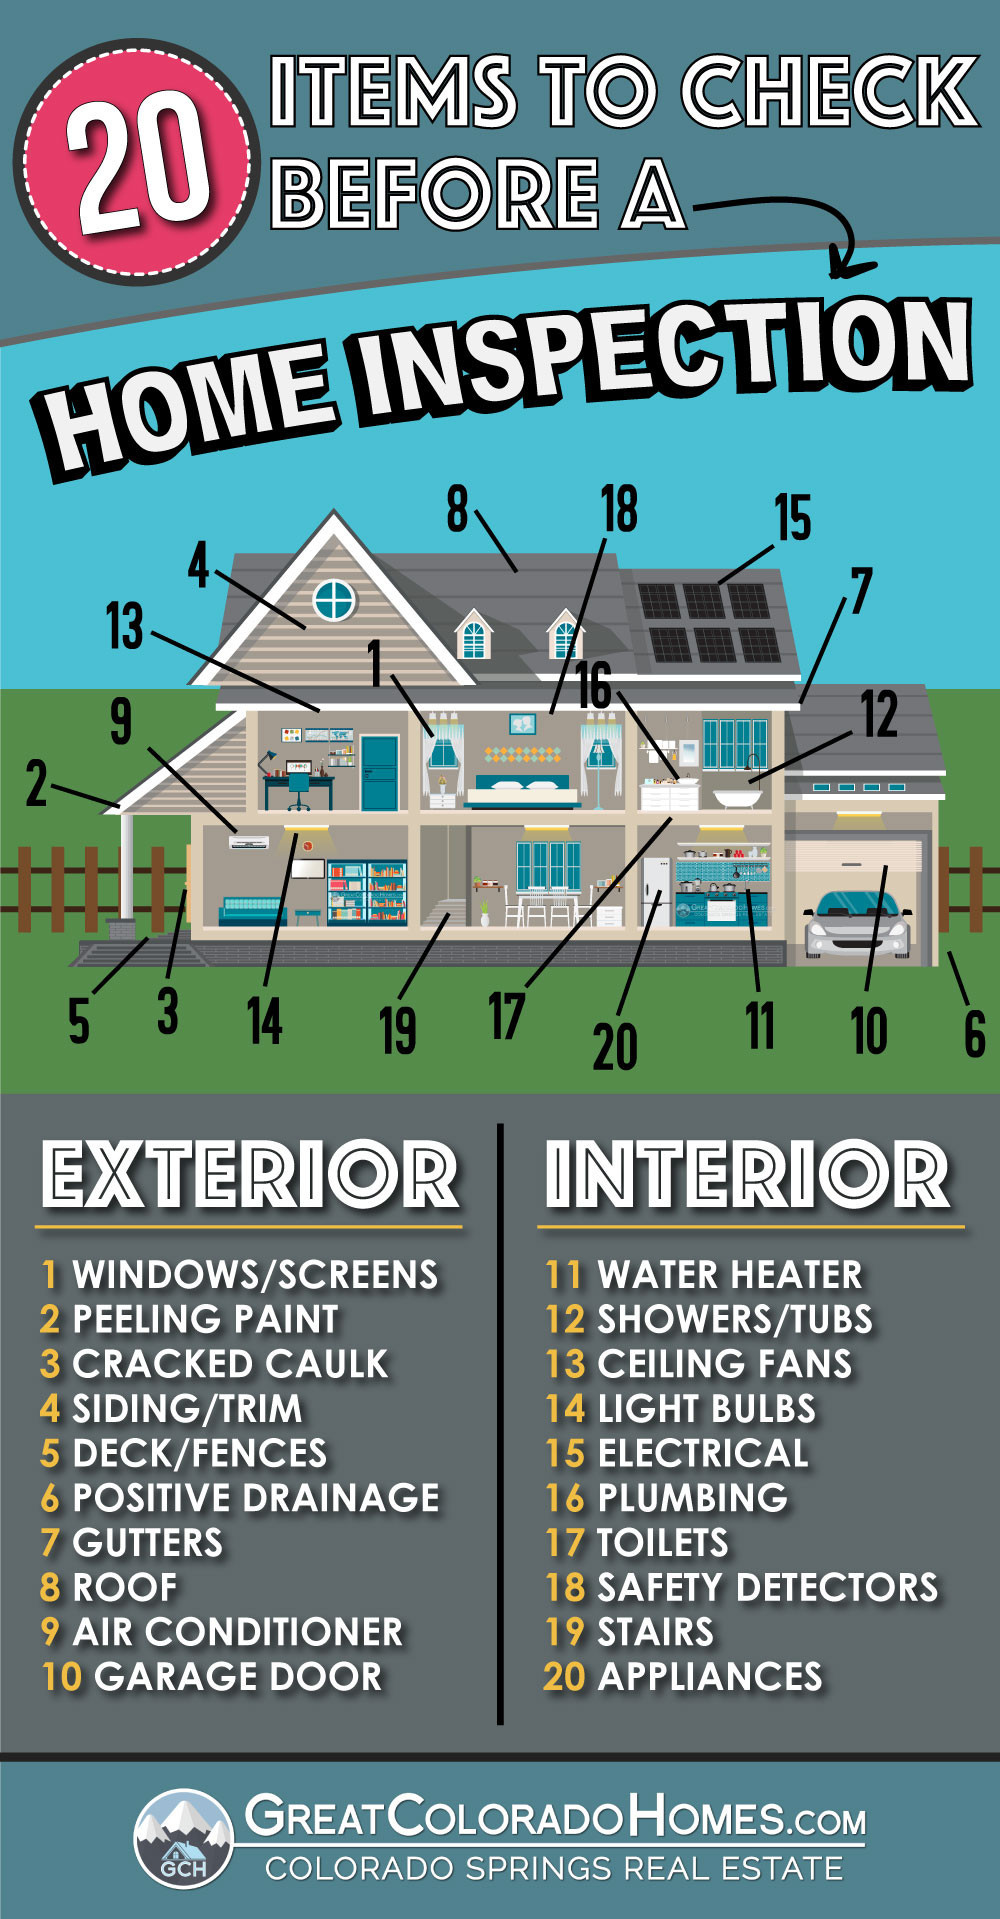 20 Items to Check Before A Home Inspection